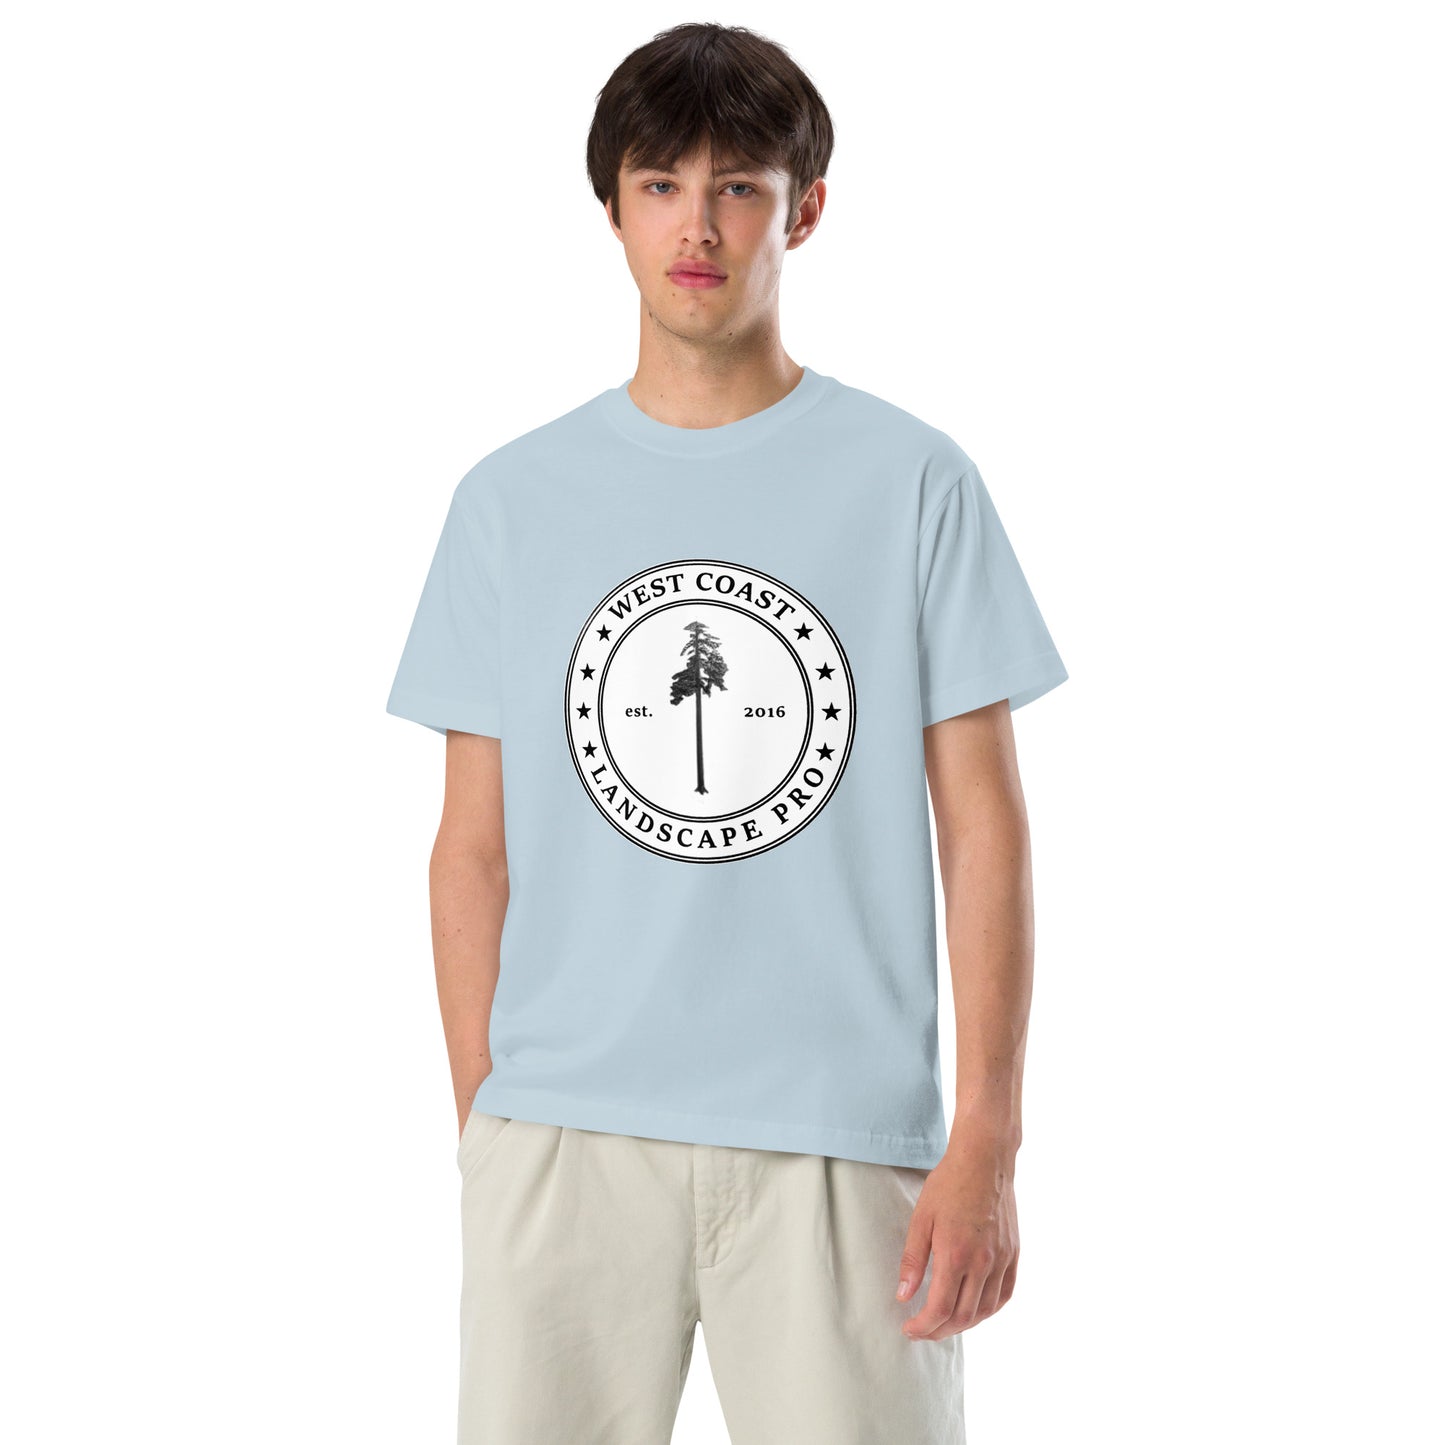 Lightweight cotton t-shirt with Big lonely Doug